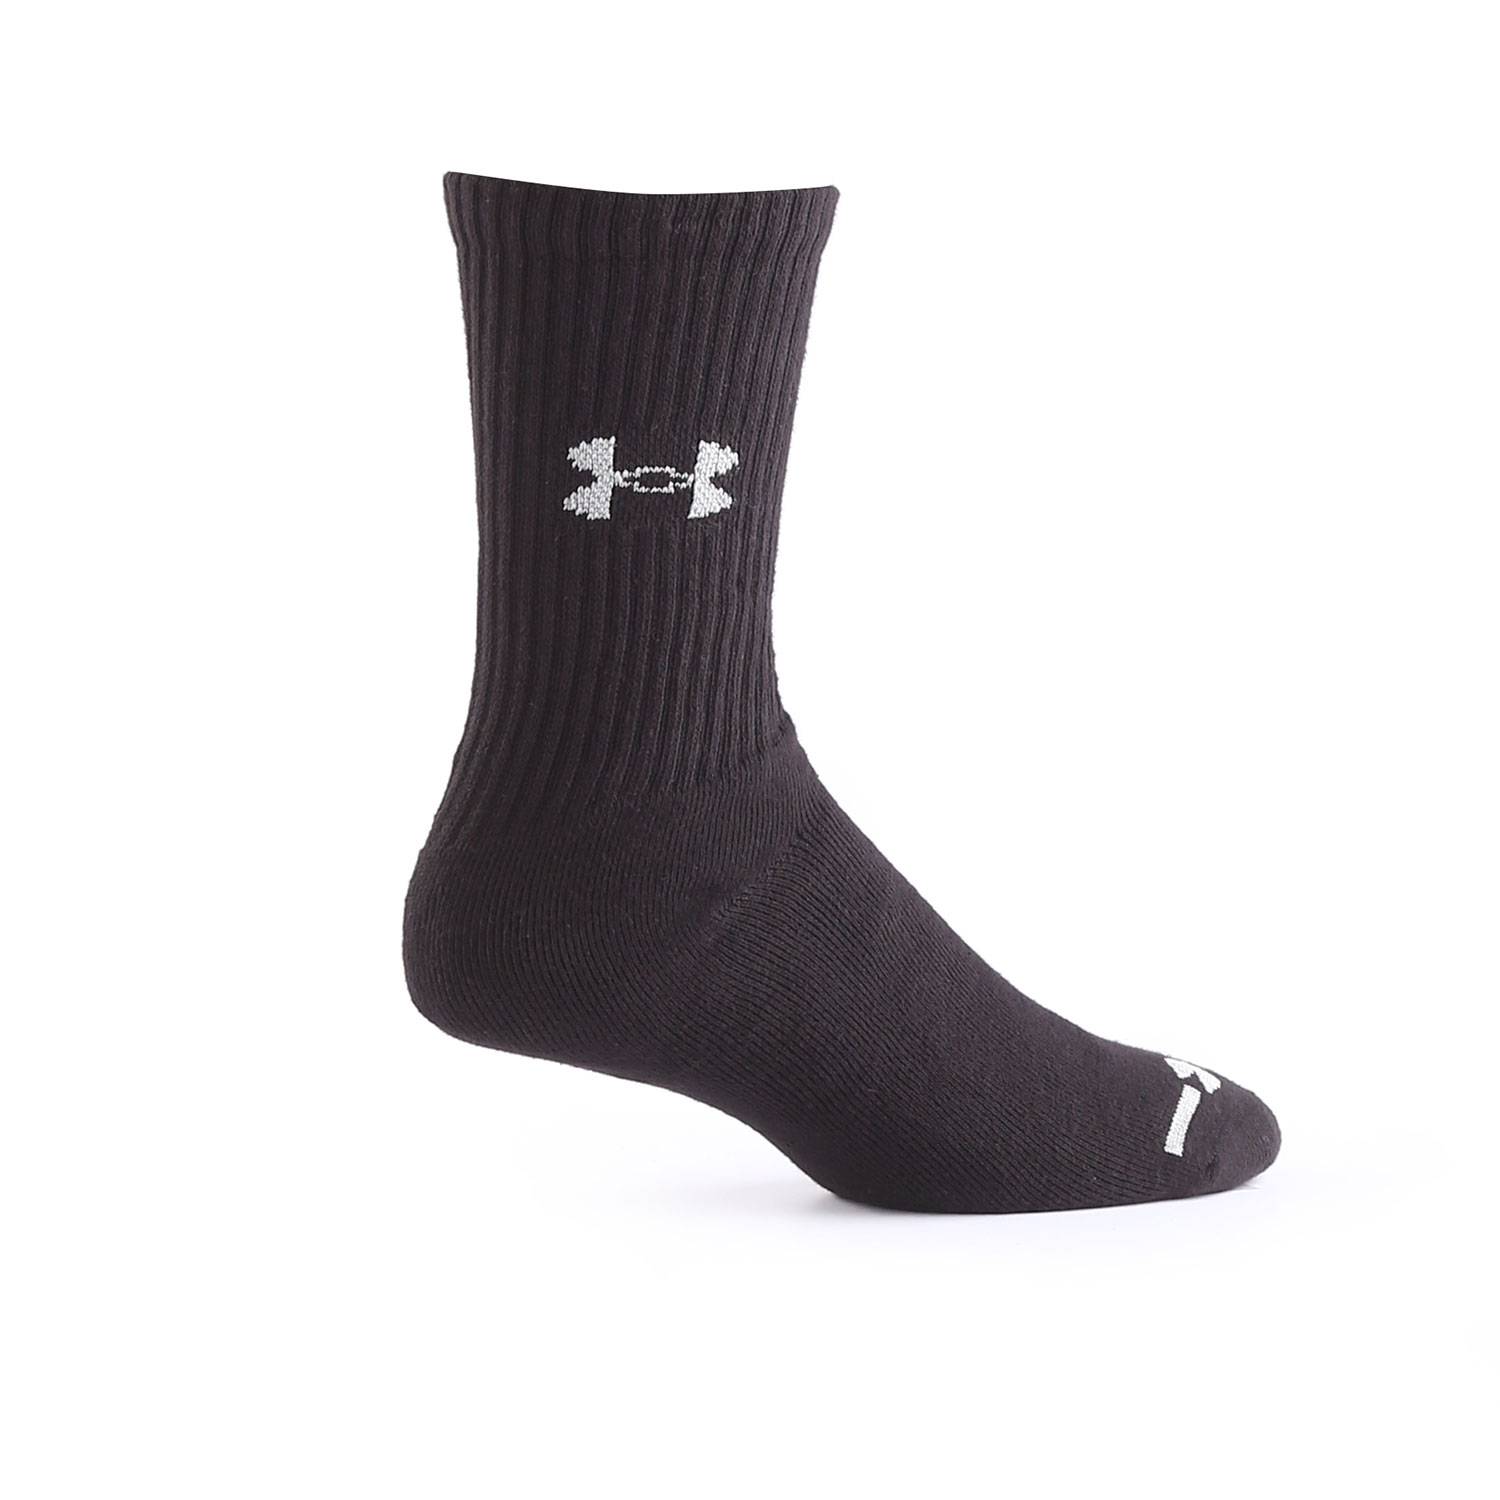 Under Armour Charged Cotton Crew Socks 6 Pack